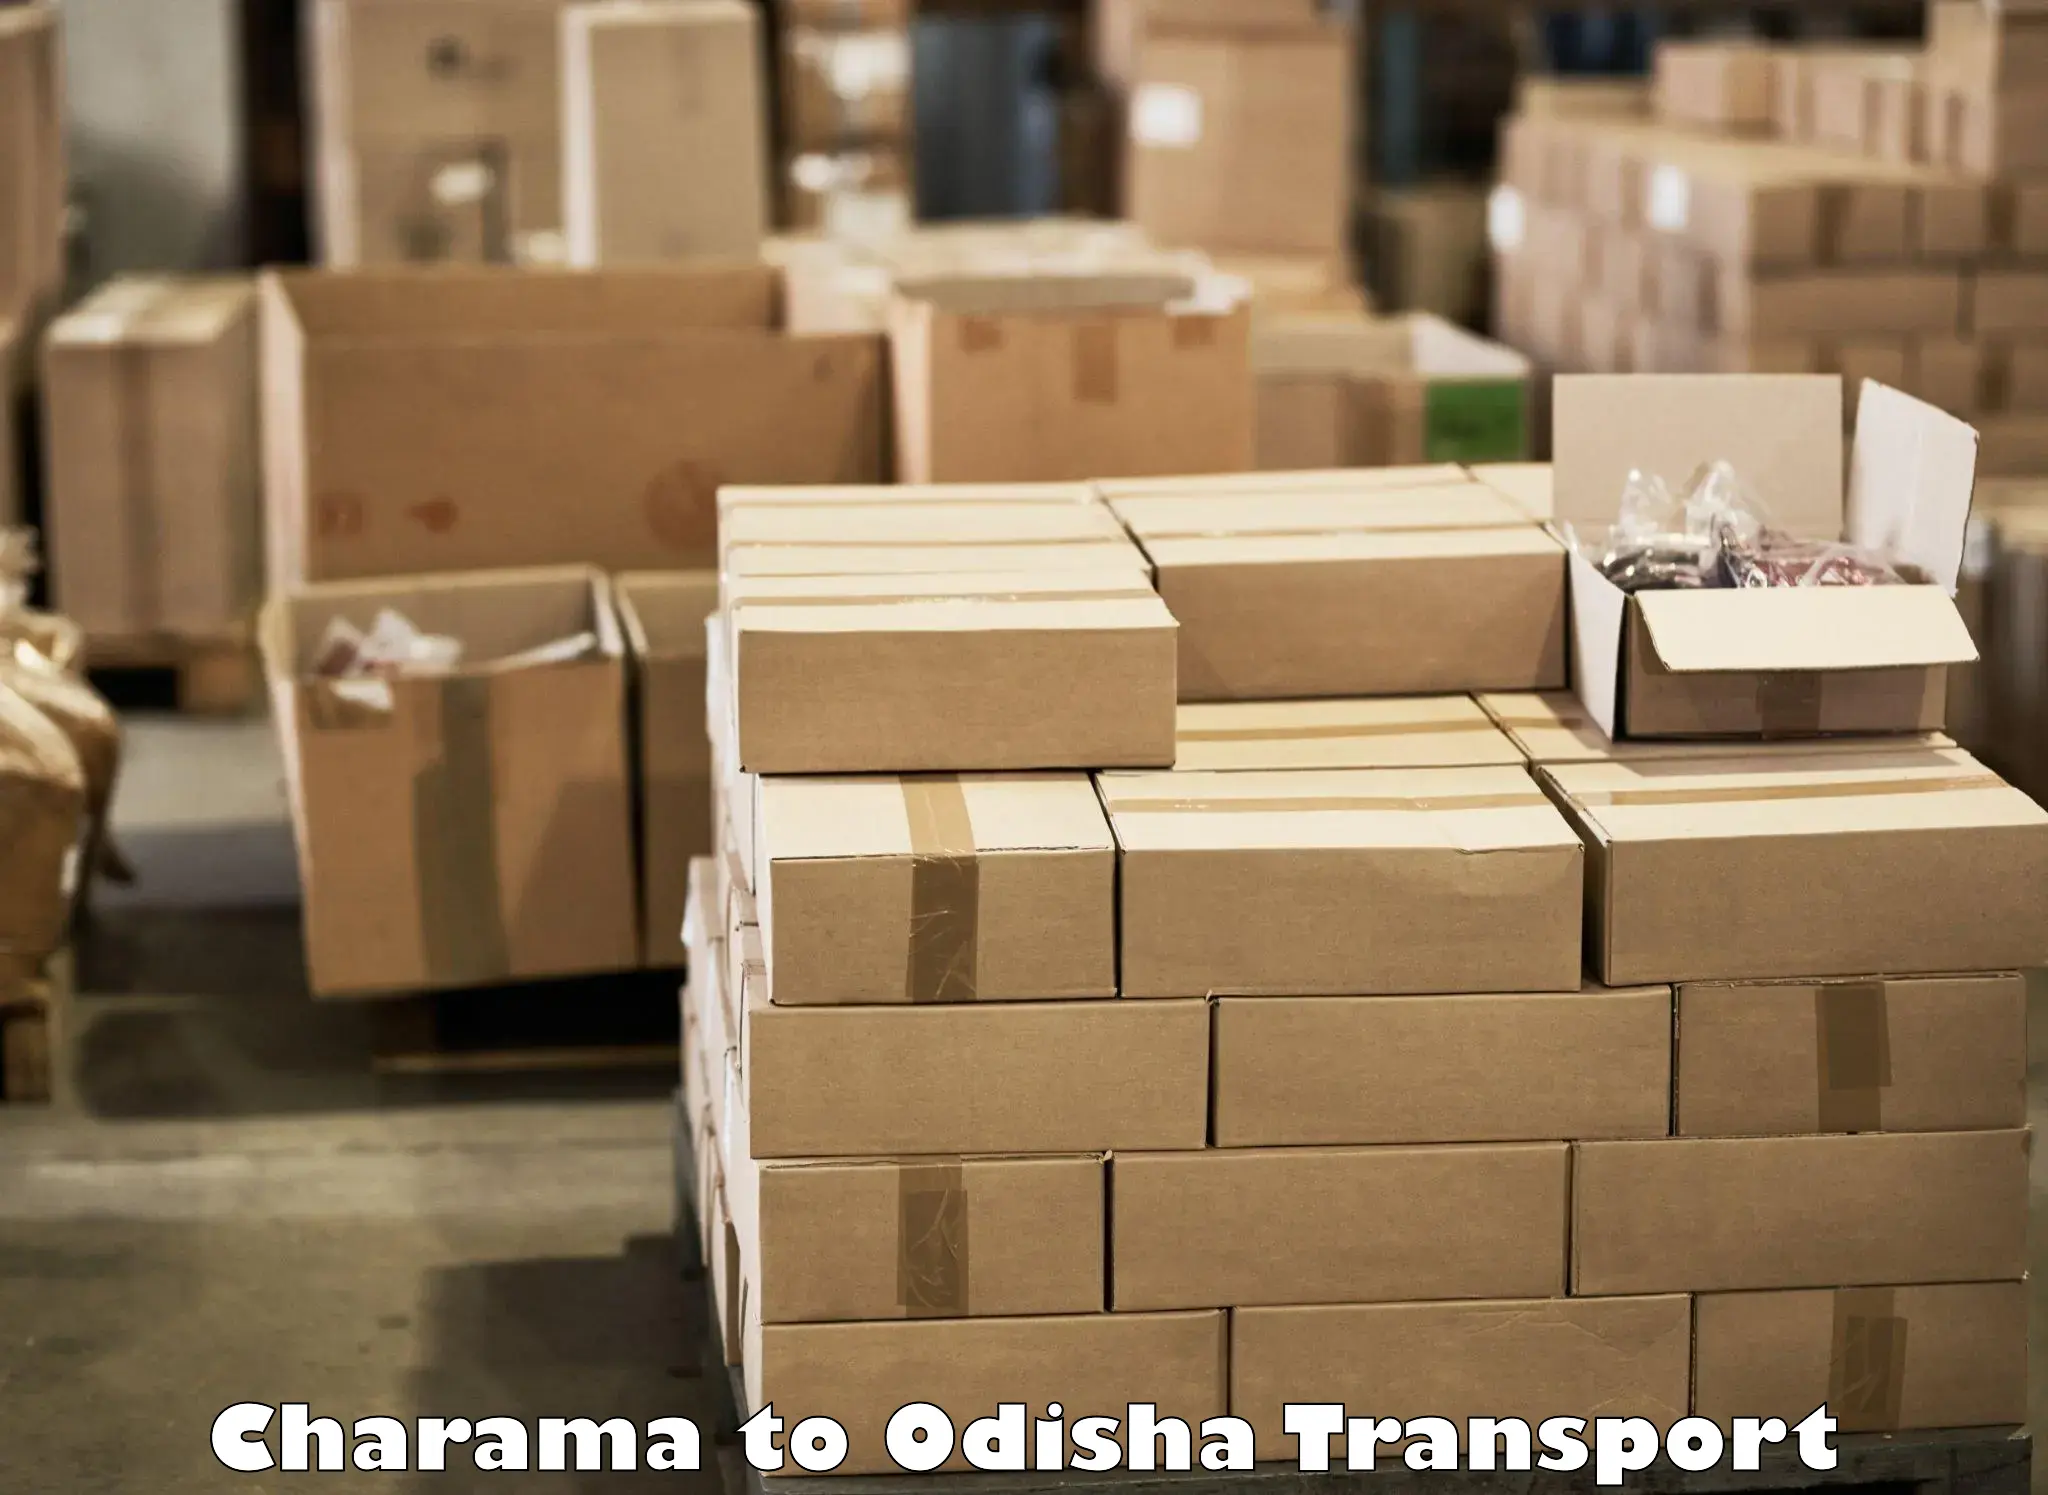 Container transport service Charama to Balinga